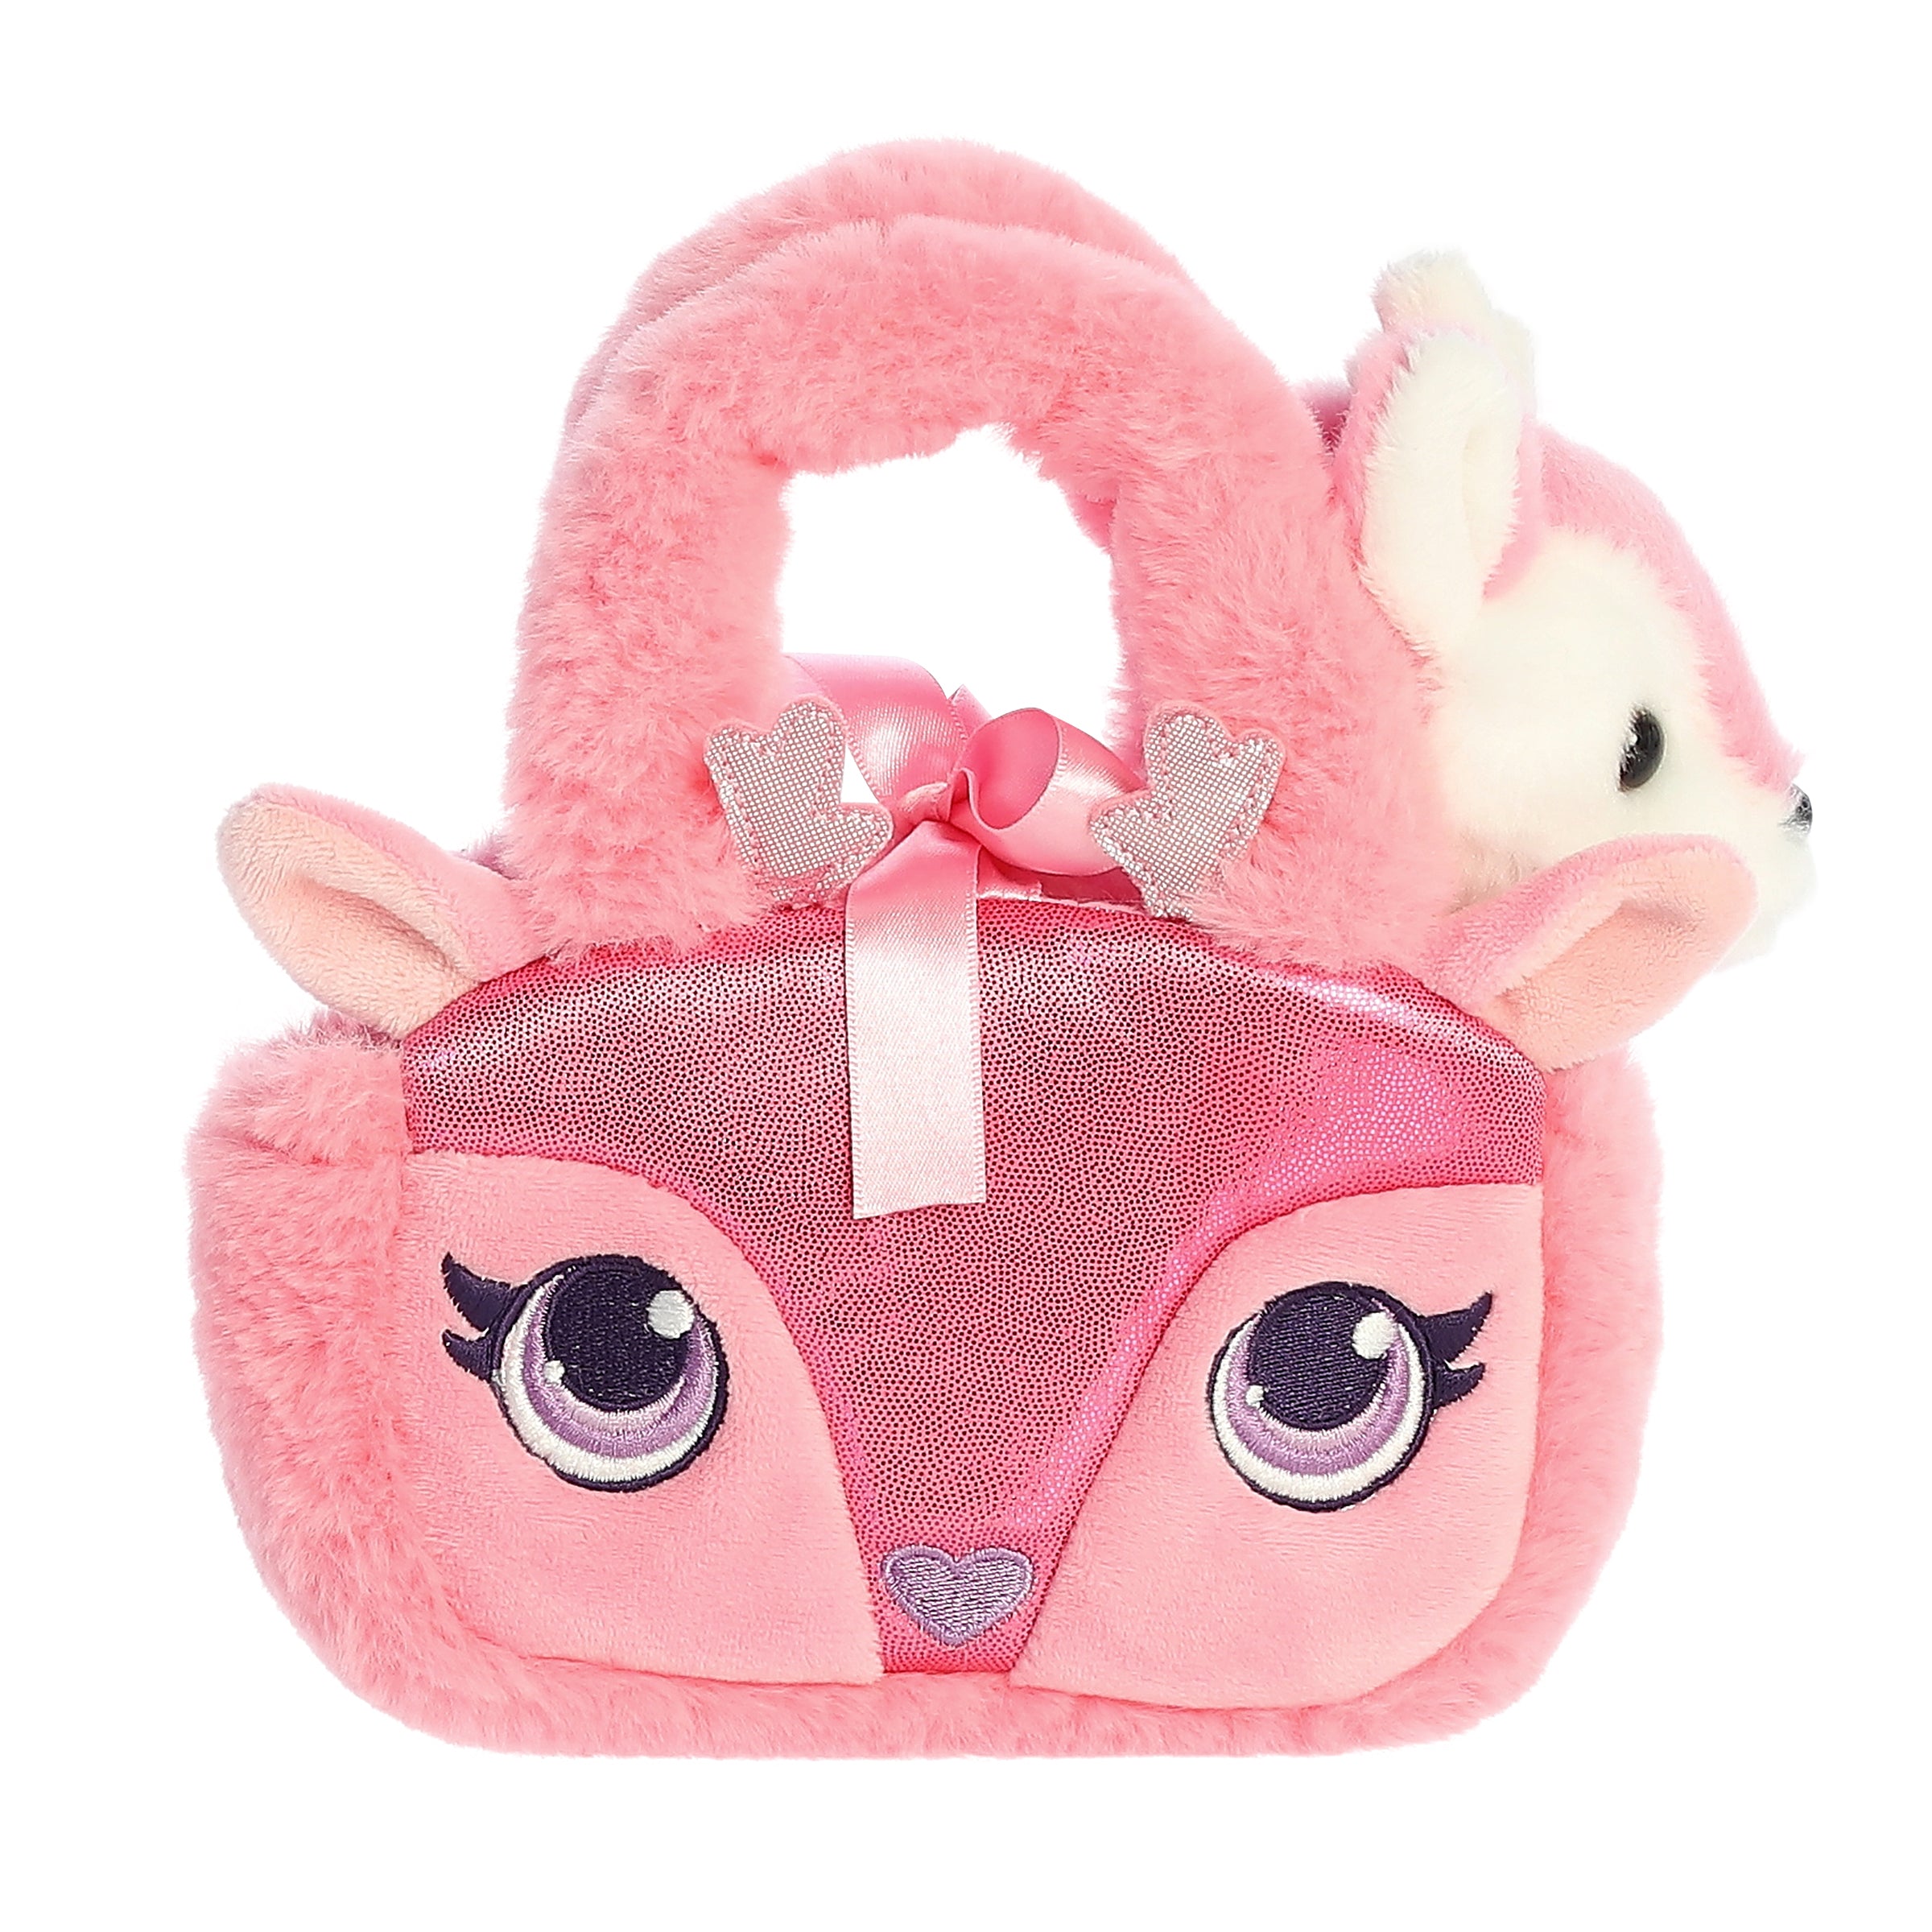 Pink Glitter Fawn plush carrier from Aurora's Fancy Pals with a snug pink and white fawn inside, embodying joyful mobility.